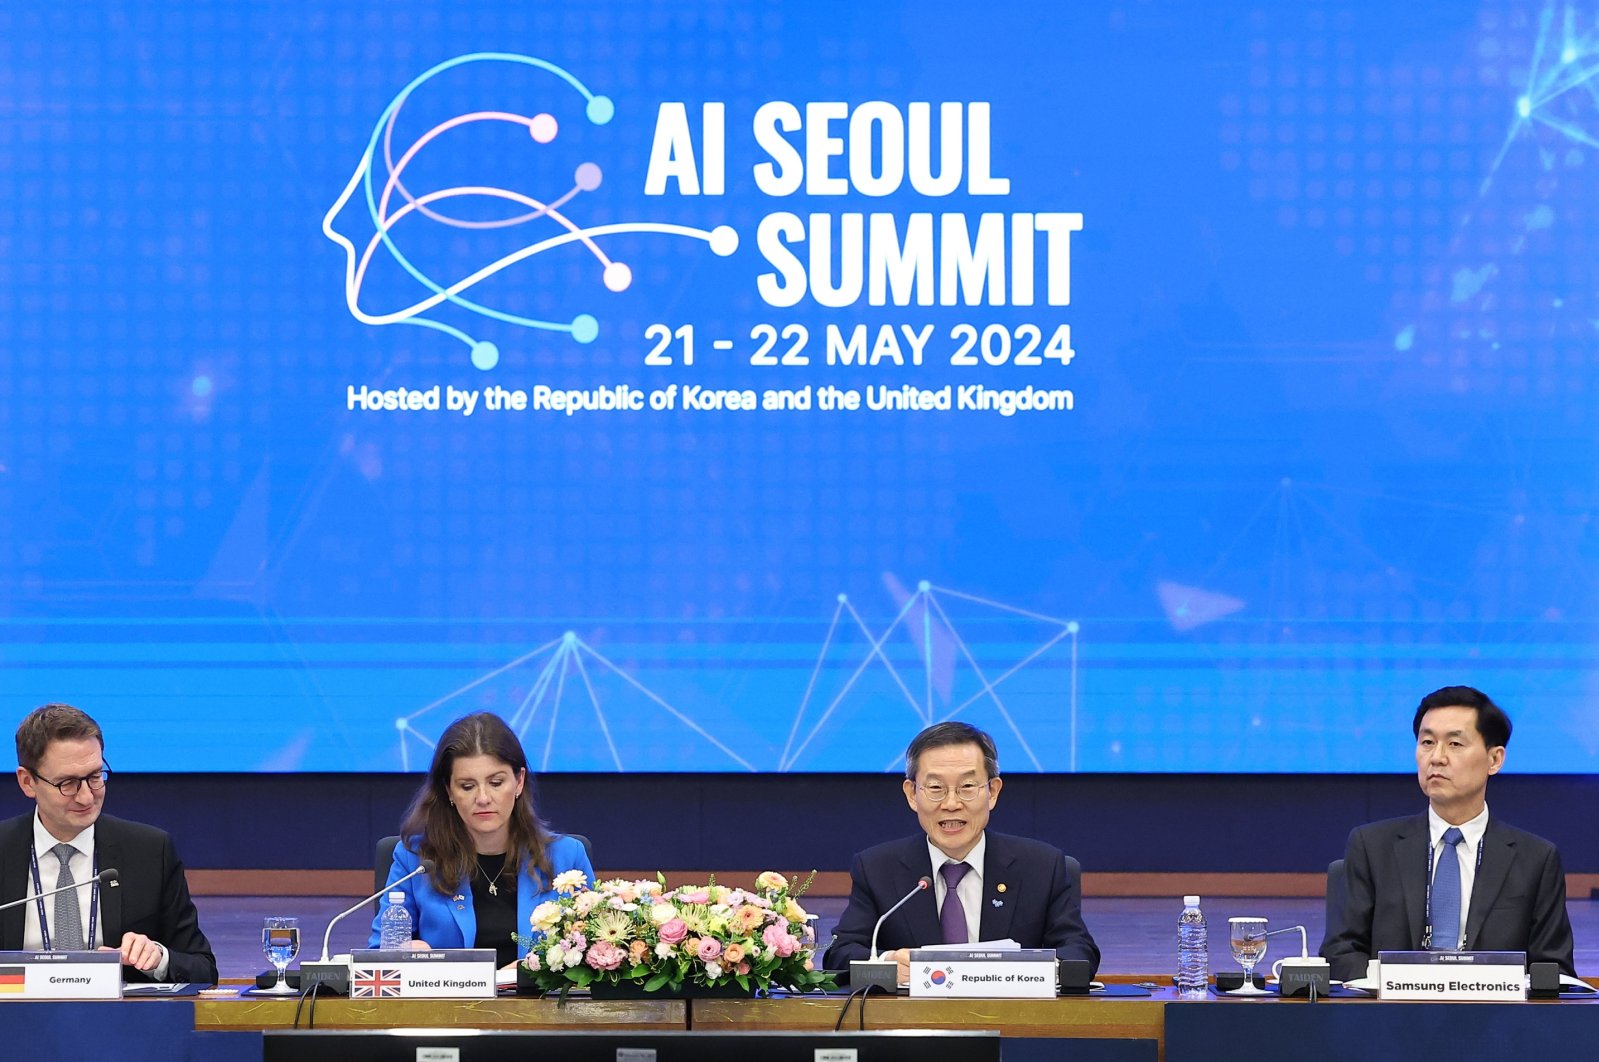 South Korea&#039;s Science Minister Lee Jong-ho (2R) delivers an opening speech during the ministerial session of the AI Seoul Summit at the Korea Institute for Science and Technology, co-hosted by South Korea and Britain, in the capital city of Seoul, South Korea, May 22, 2024. (EPA Photo)